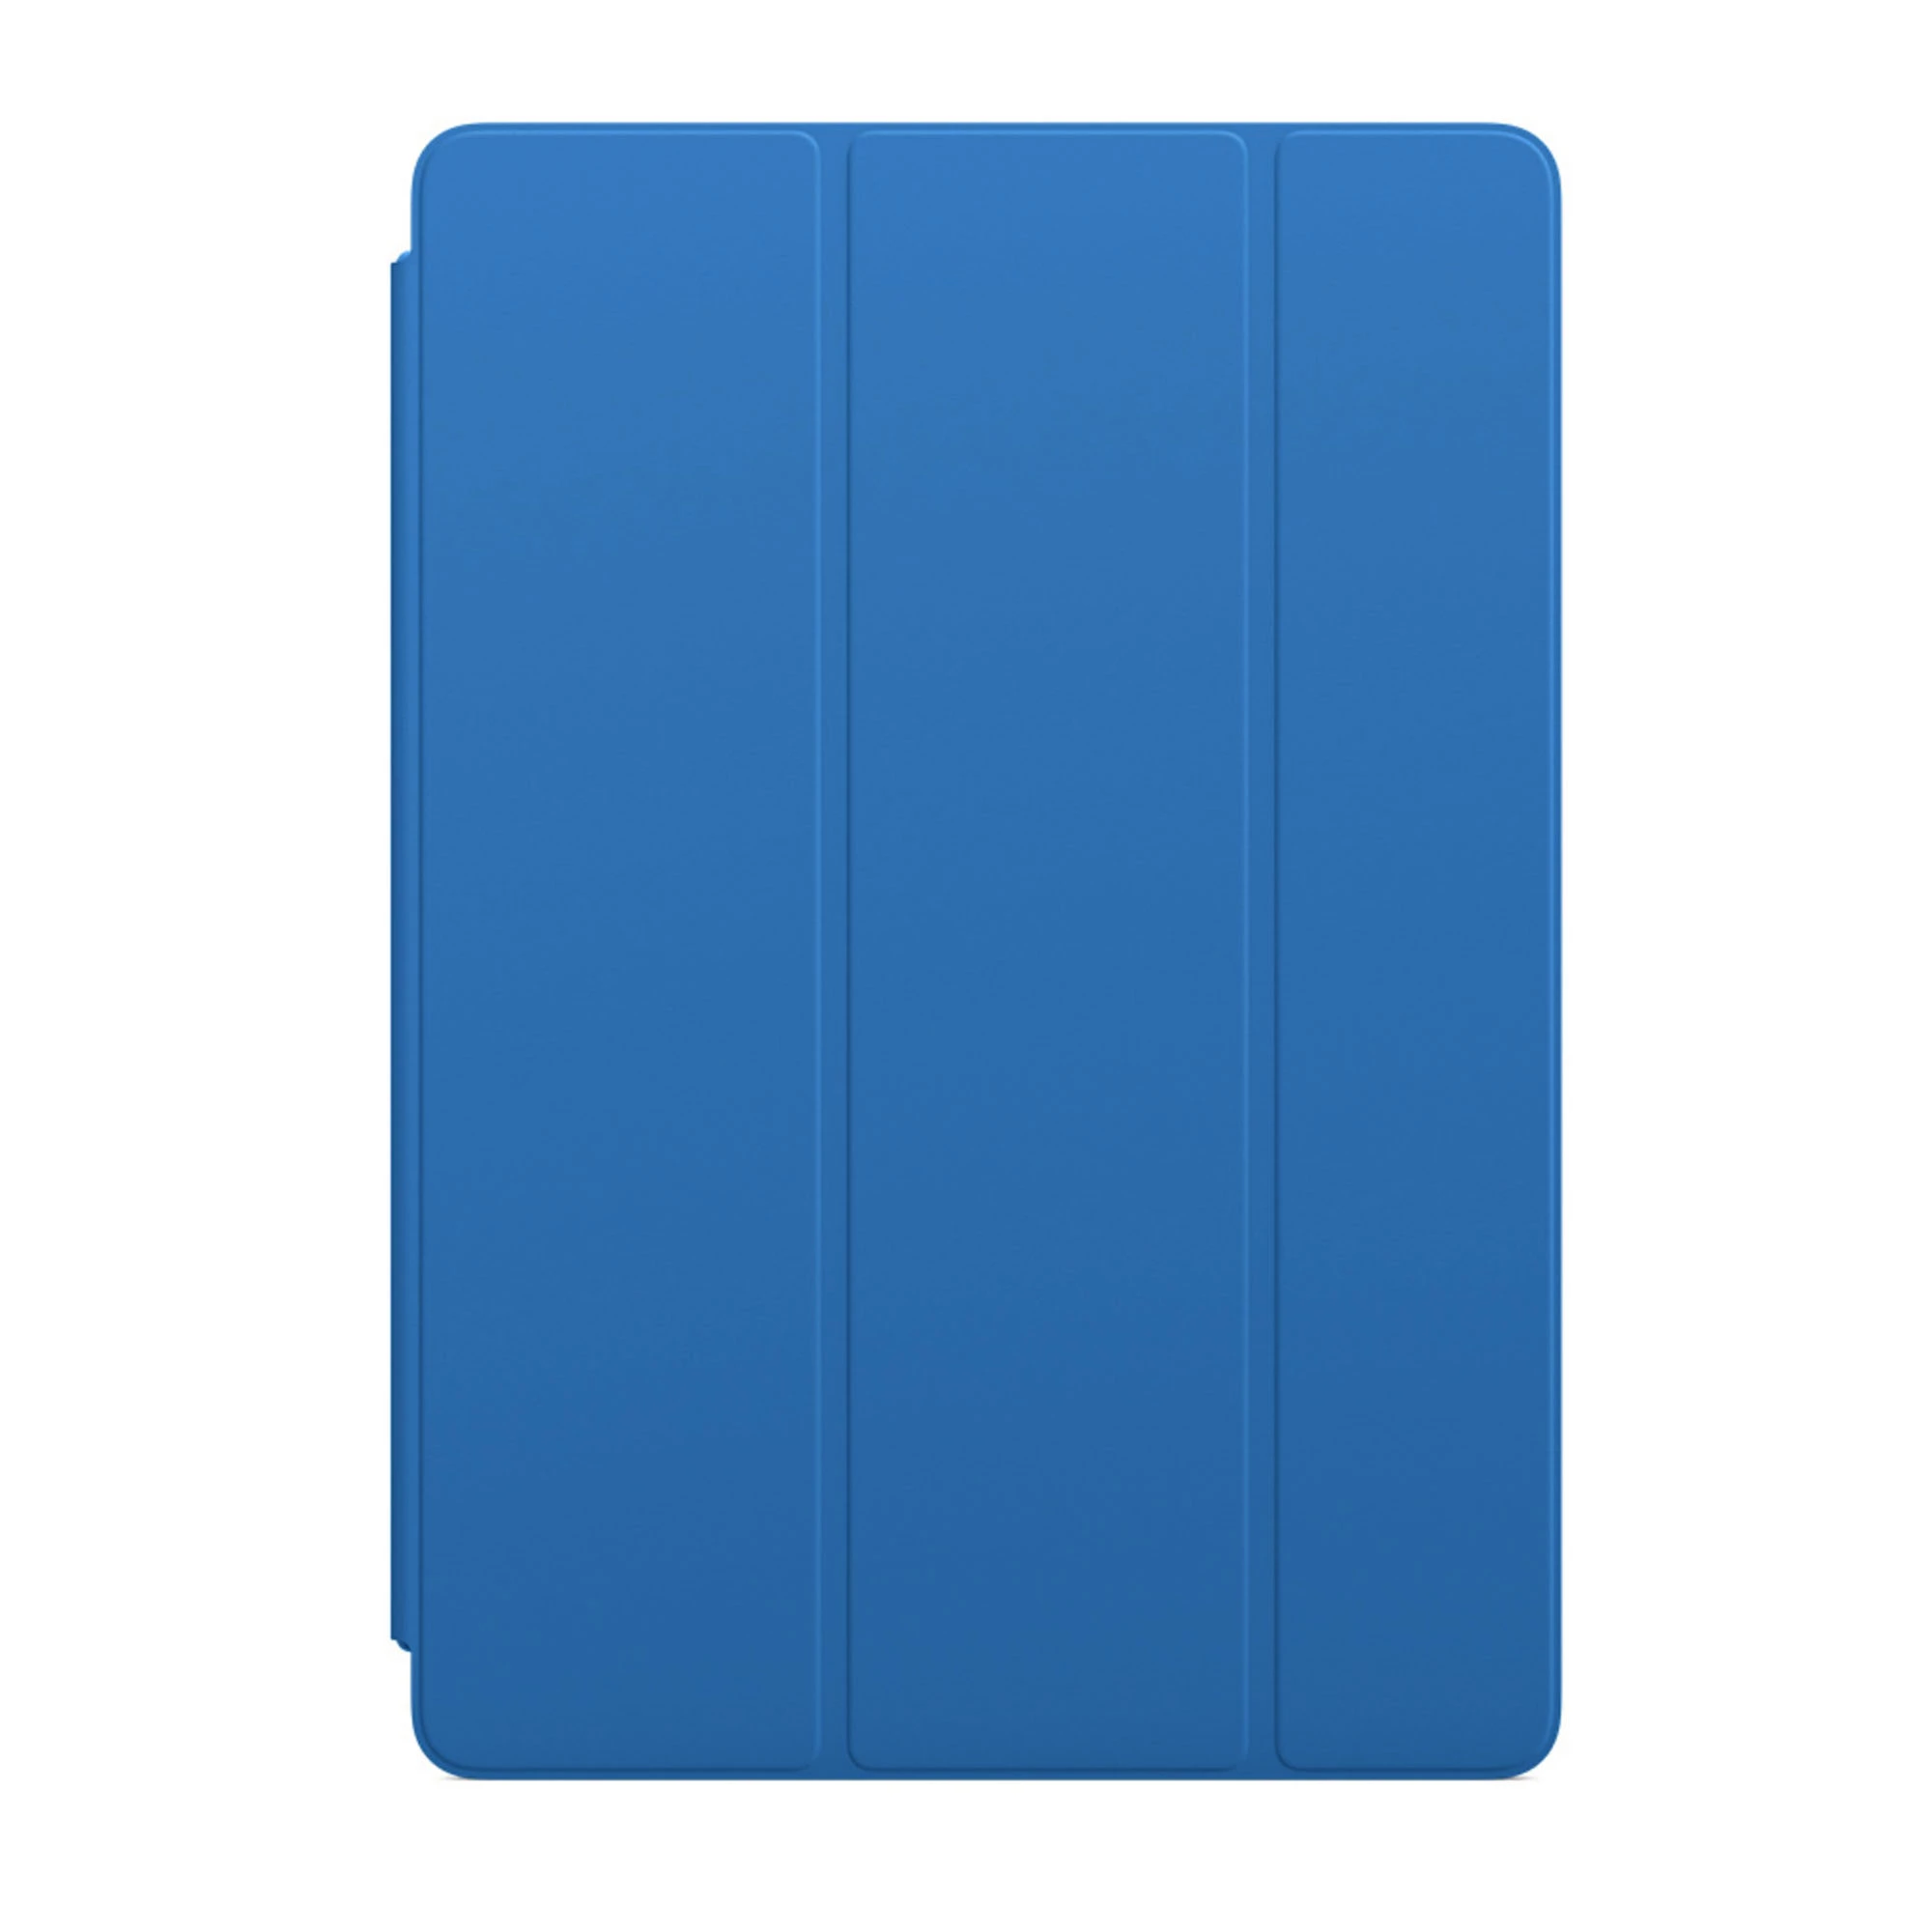 Apple Smart Cover for iPad 10.2" / Air 3 / Pro 10.5" - Surf Blue (MXTF2)